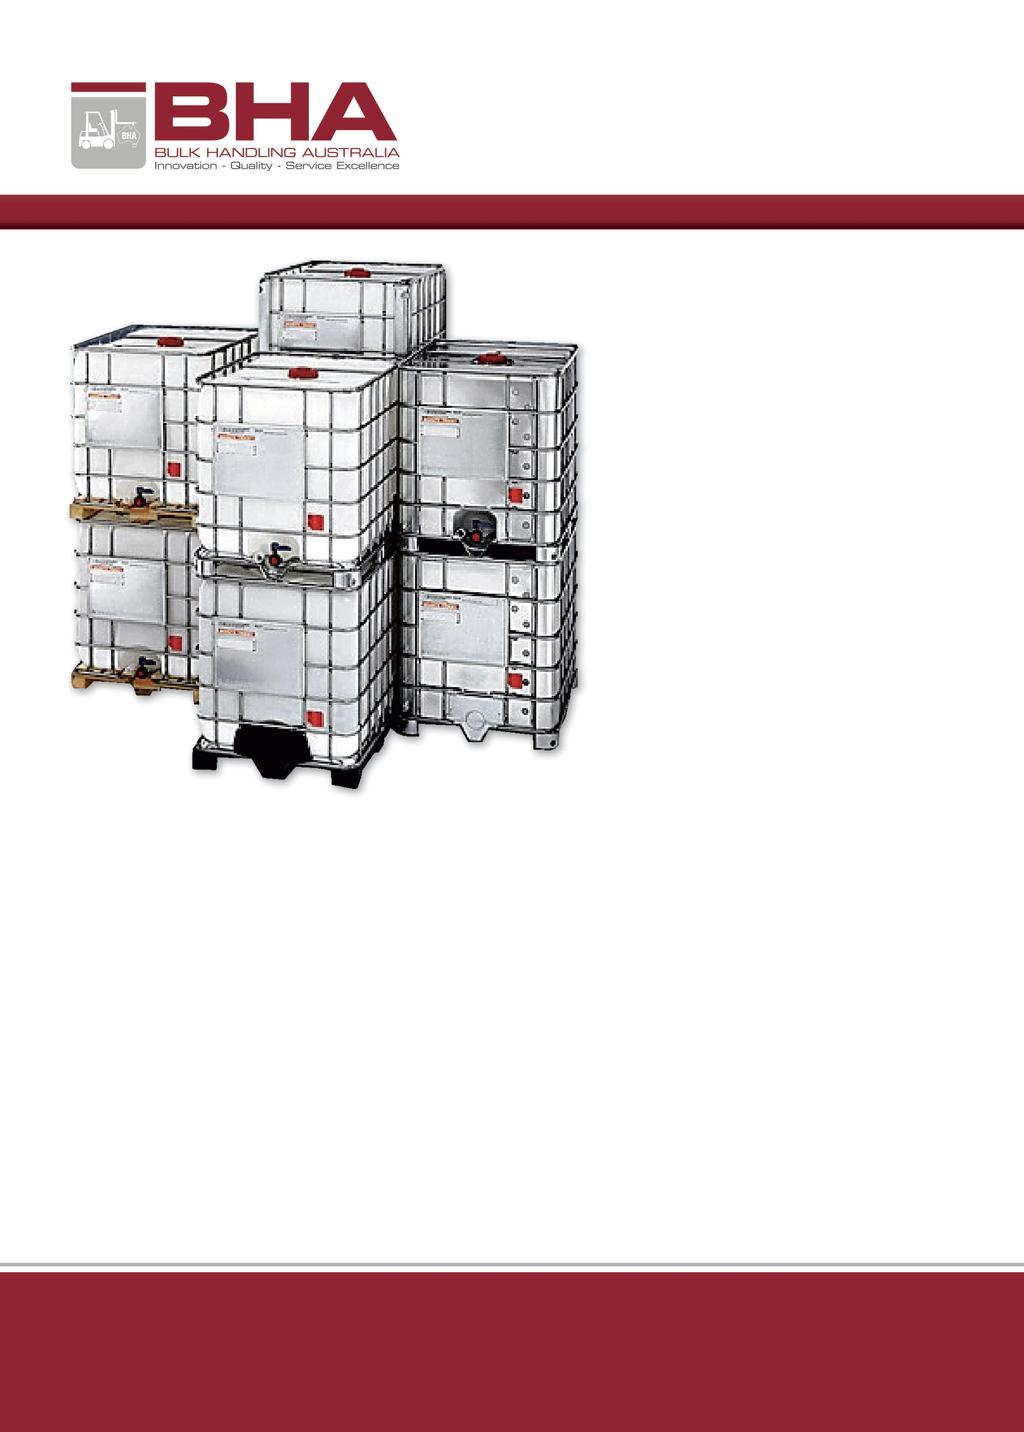 SCHUTZ ECOBULK SCHUTZ ECOBULK IBC s Schutz Ecobulk Intermediate Bulk Containers (IBC s) are market leaders throughout the world as an efficient form of packaging for liquid products.